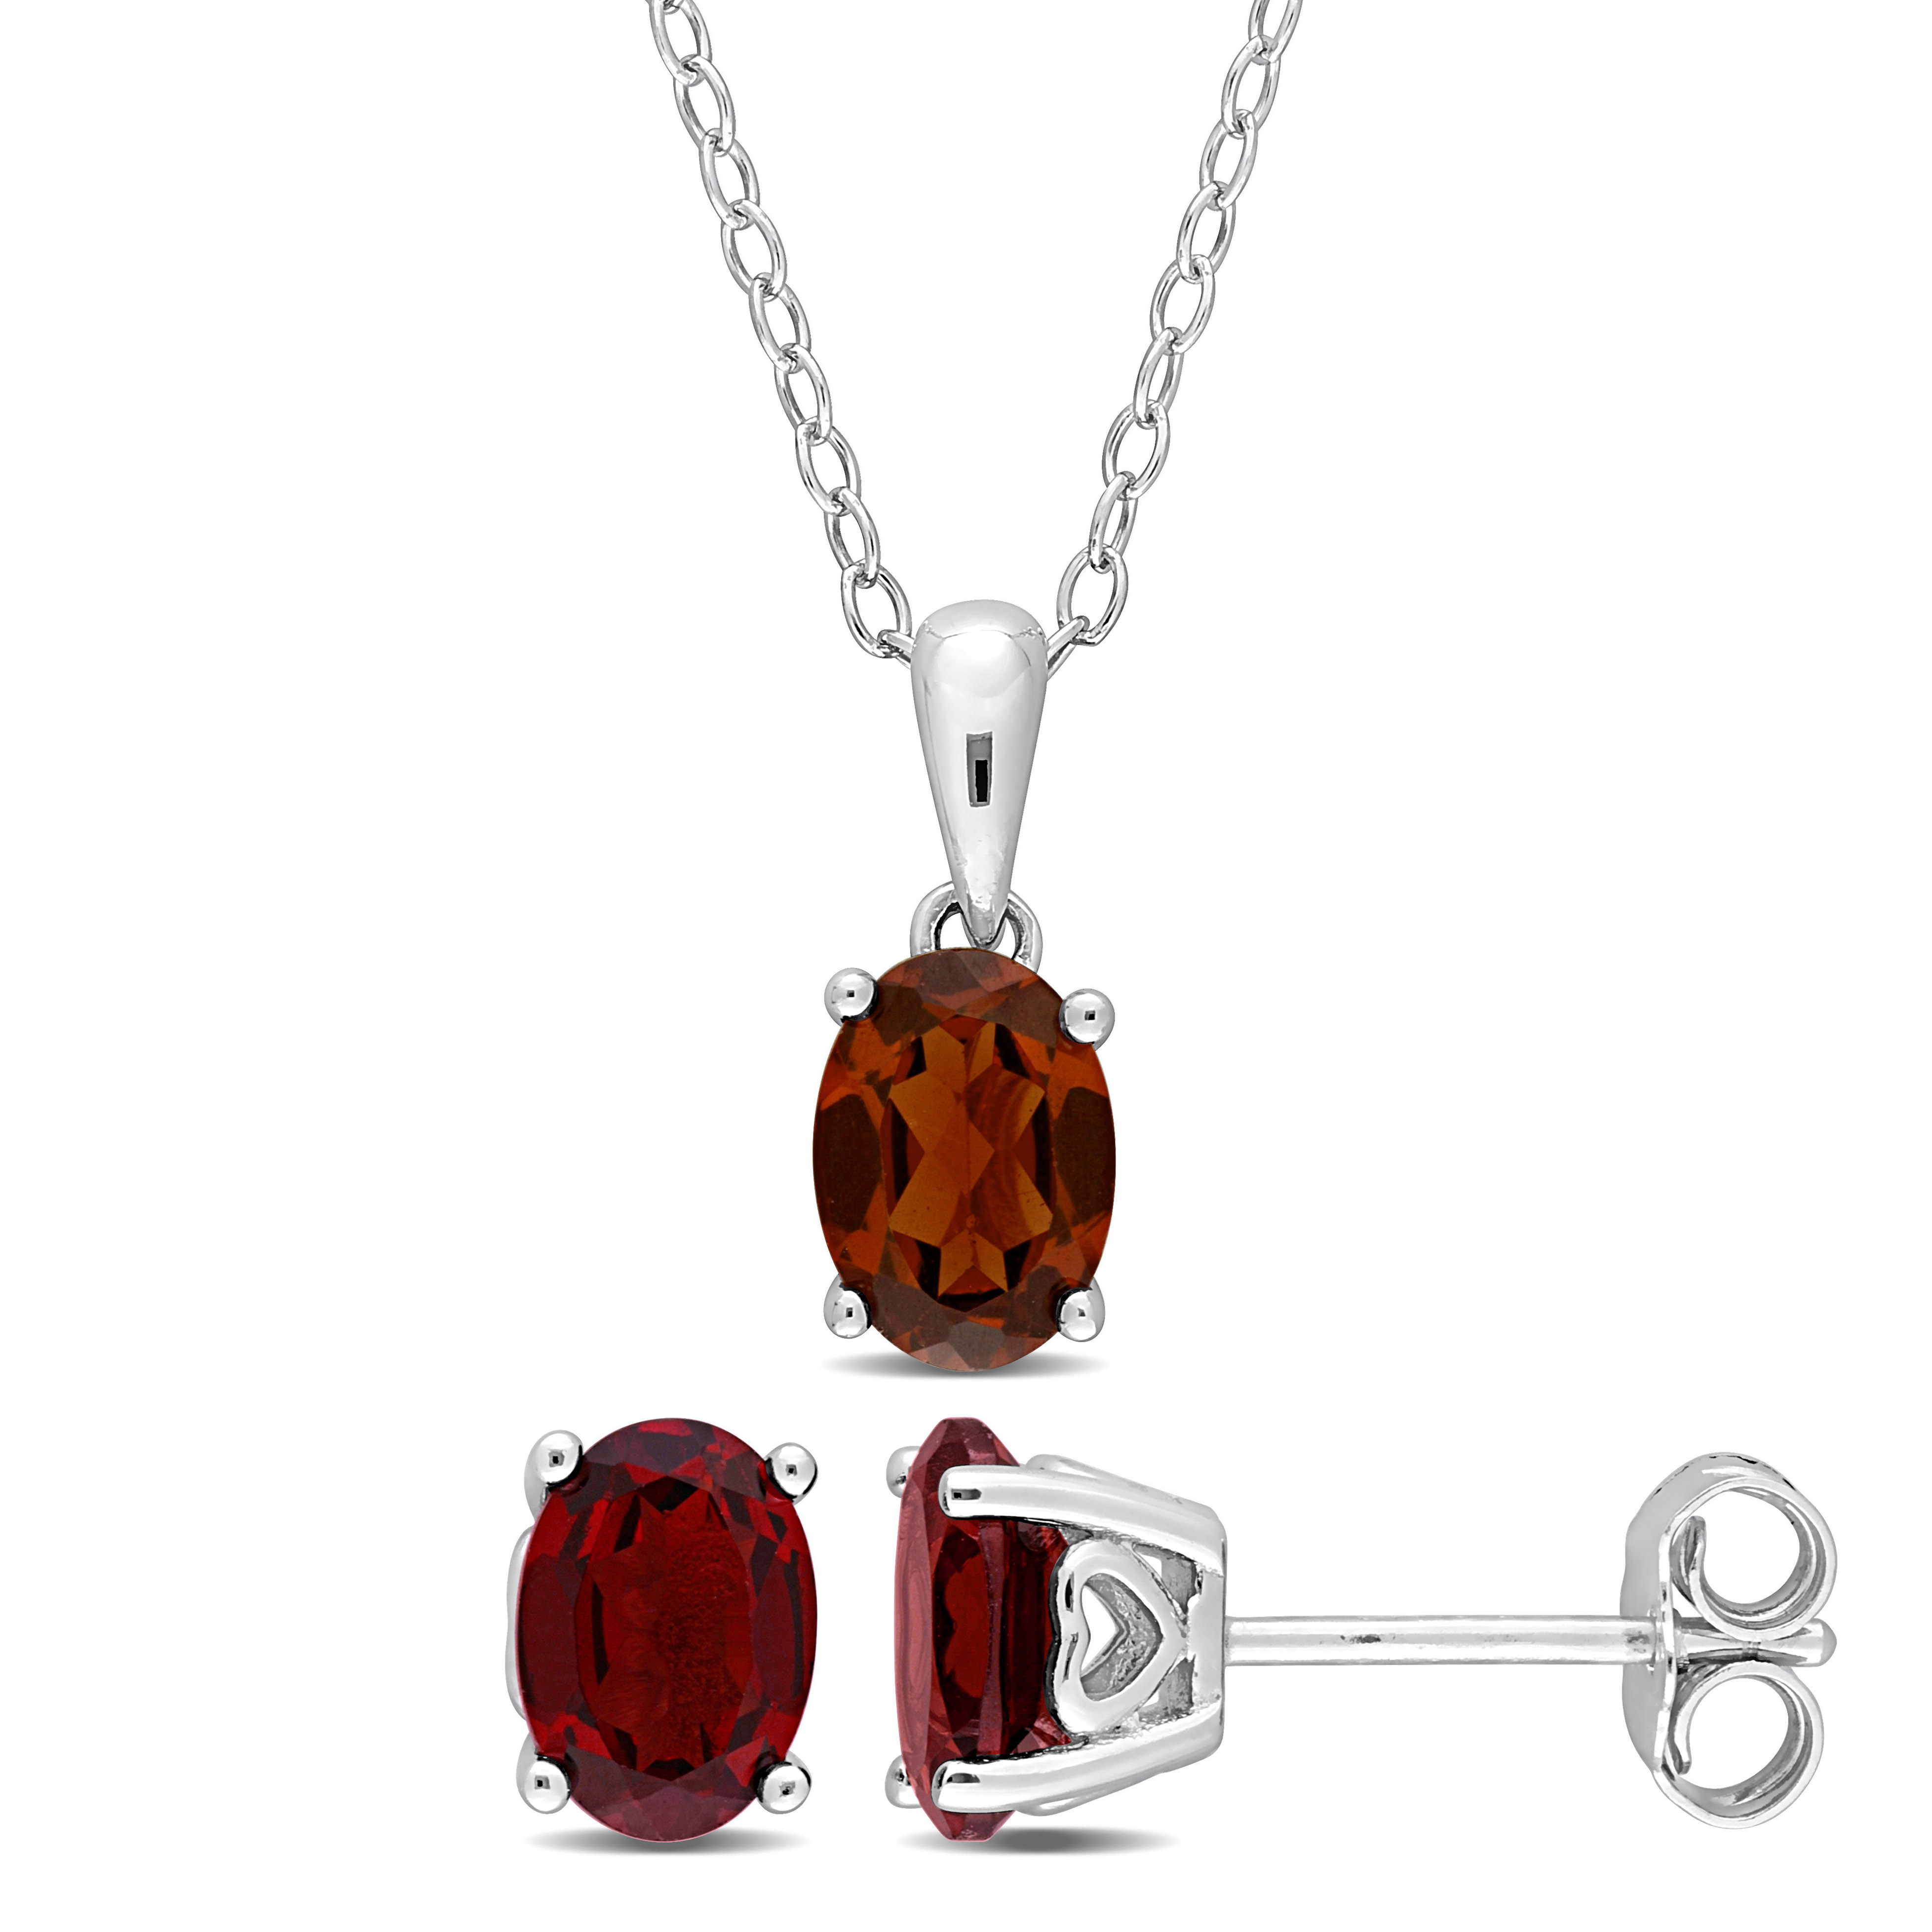 2 4/5 CT TGW Oval Garnet 2-Piece Set of Pendant with Chain and Earrings in Sterling Silver